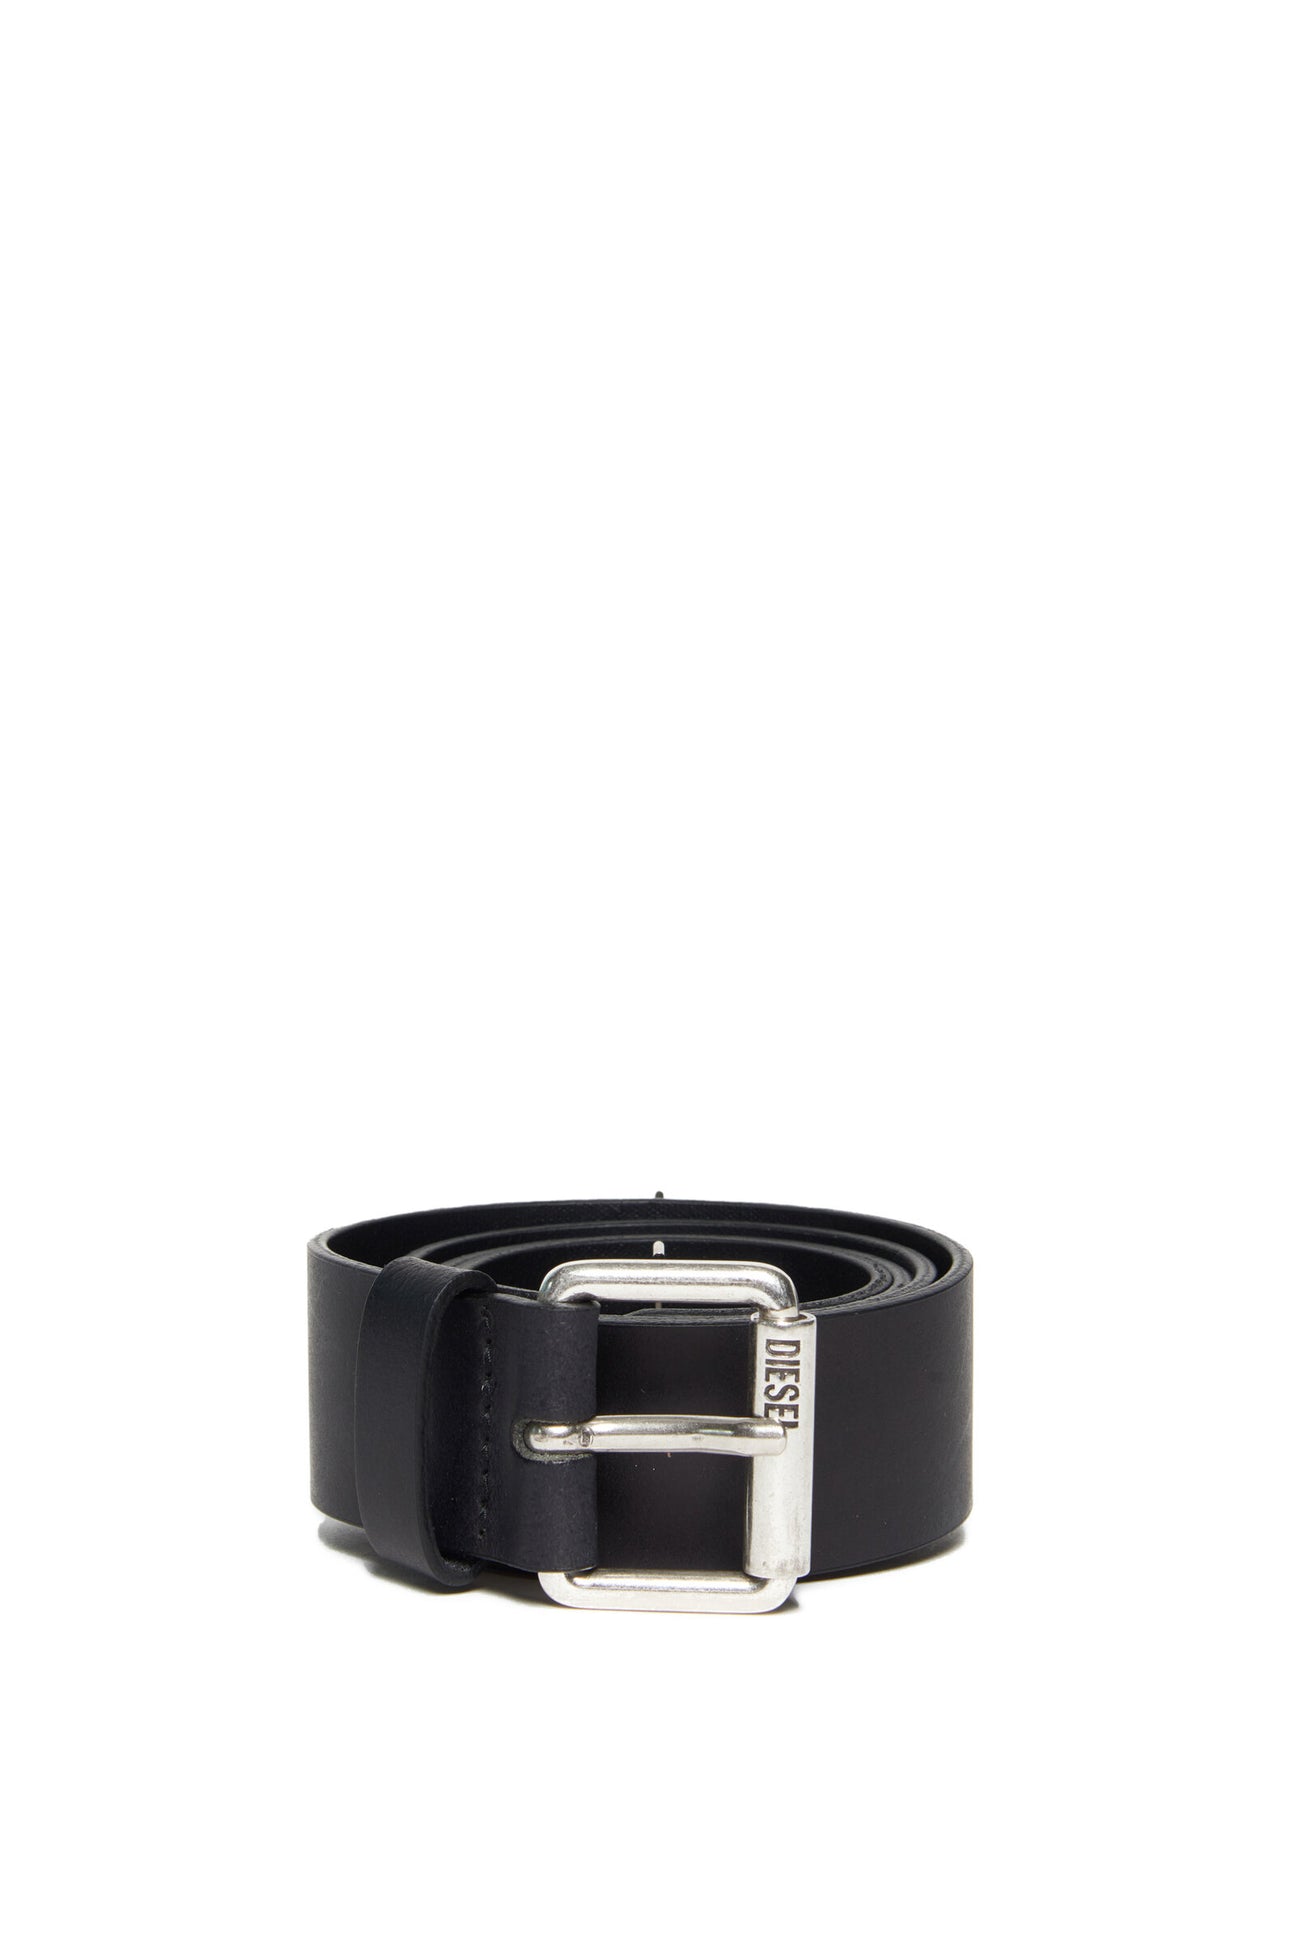 Black leather belt with logo on buckle 